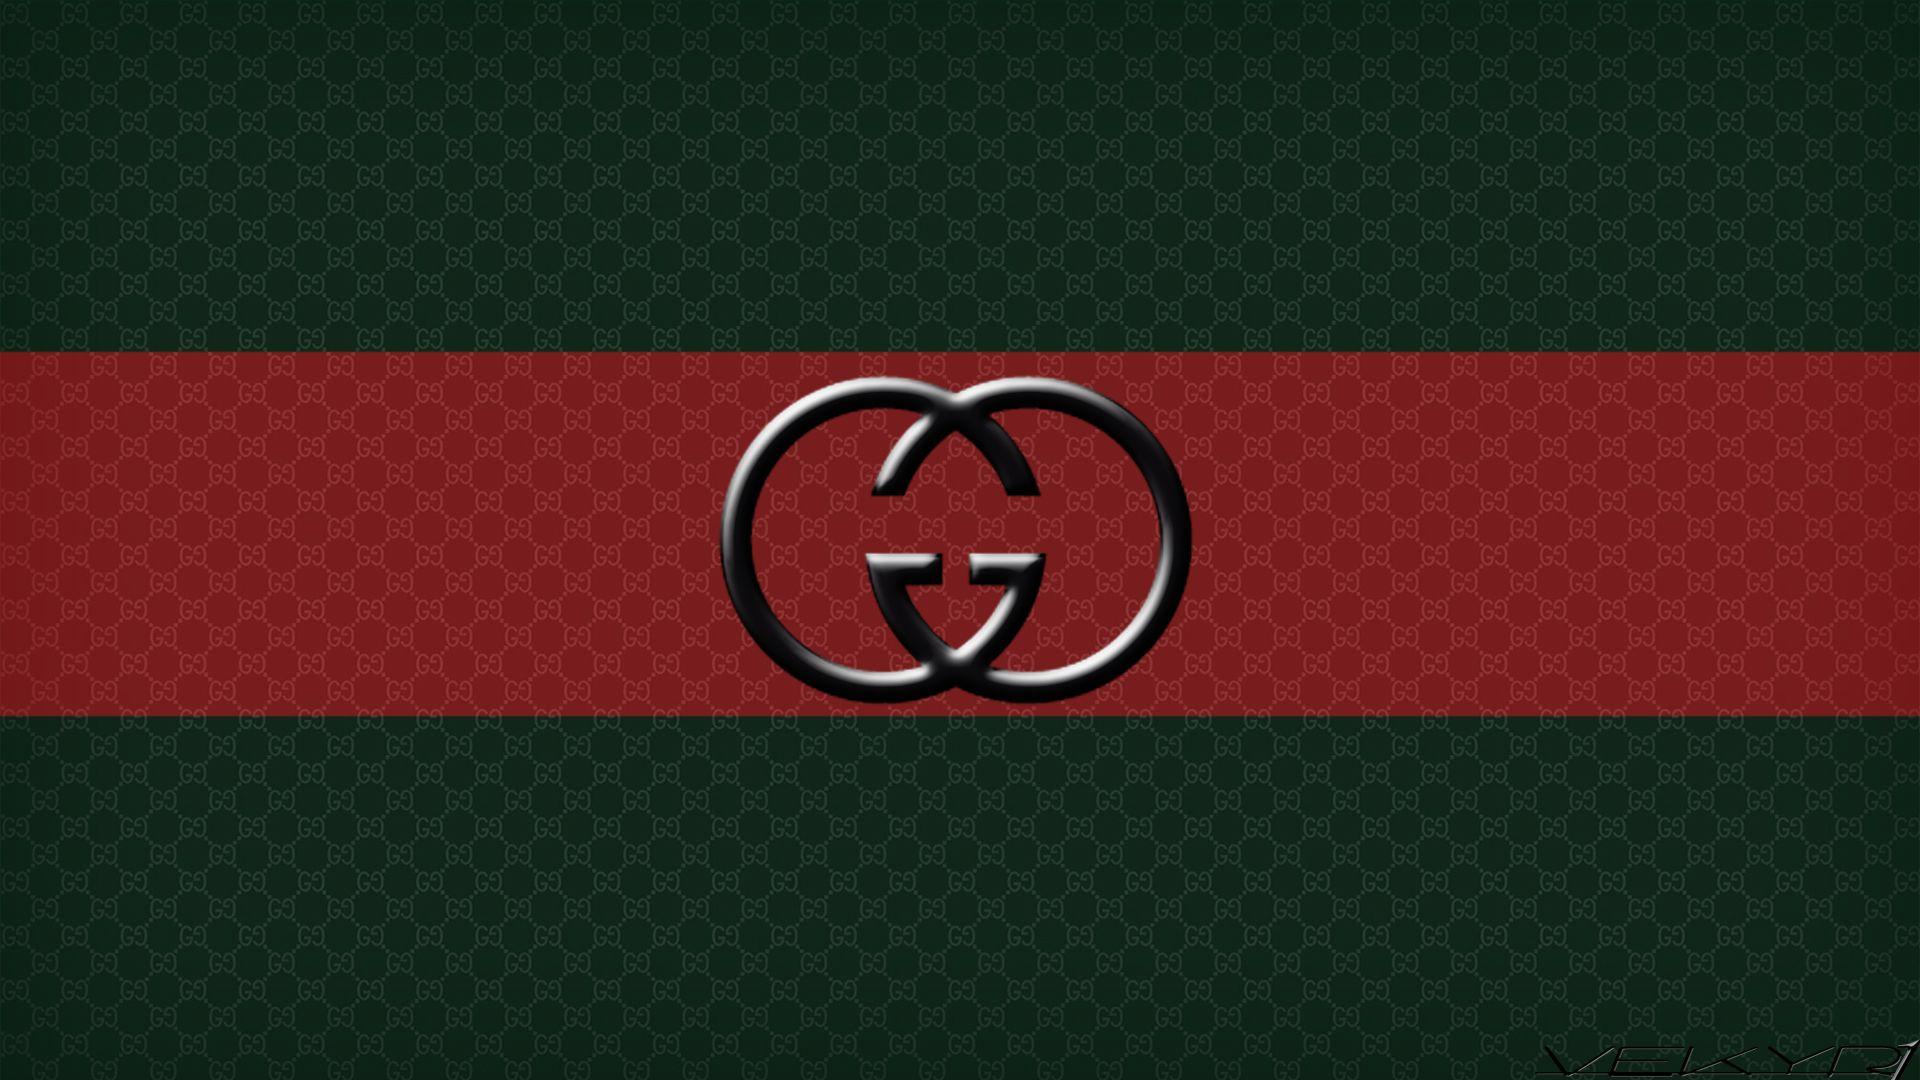 Wallpapers For > Gucci Wallpapers Hd Iphone 5